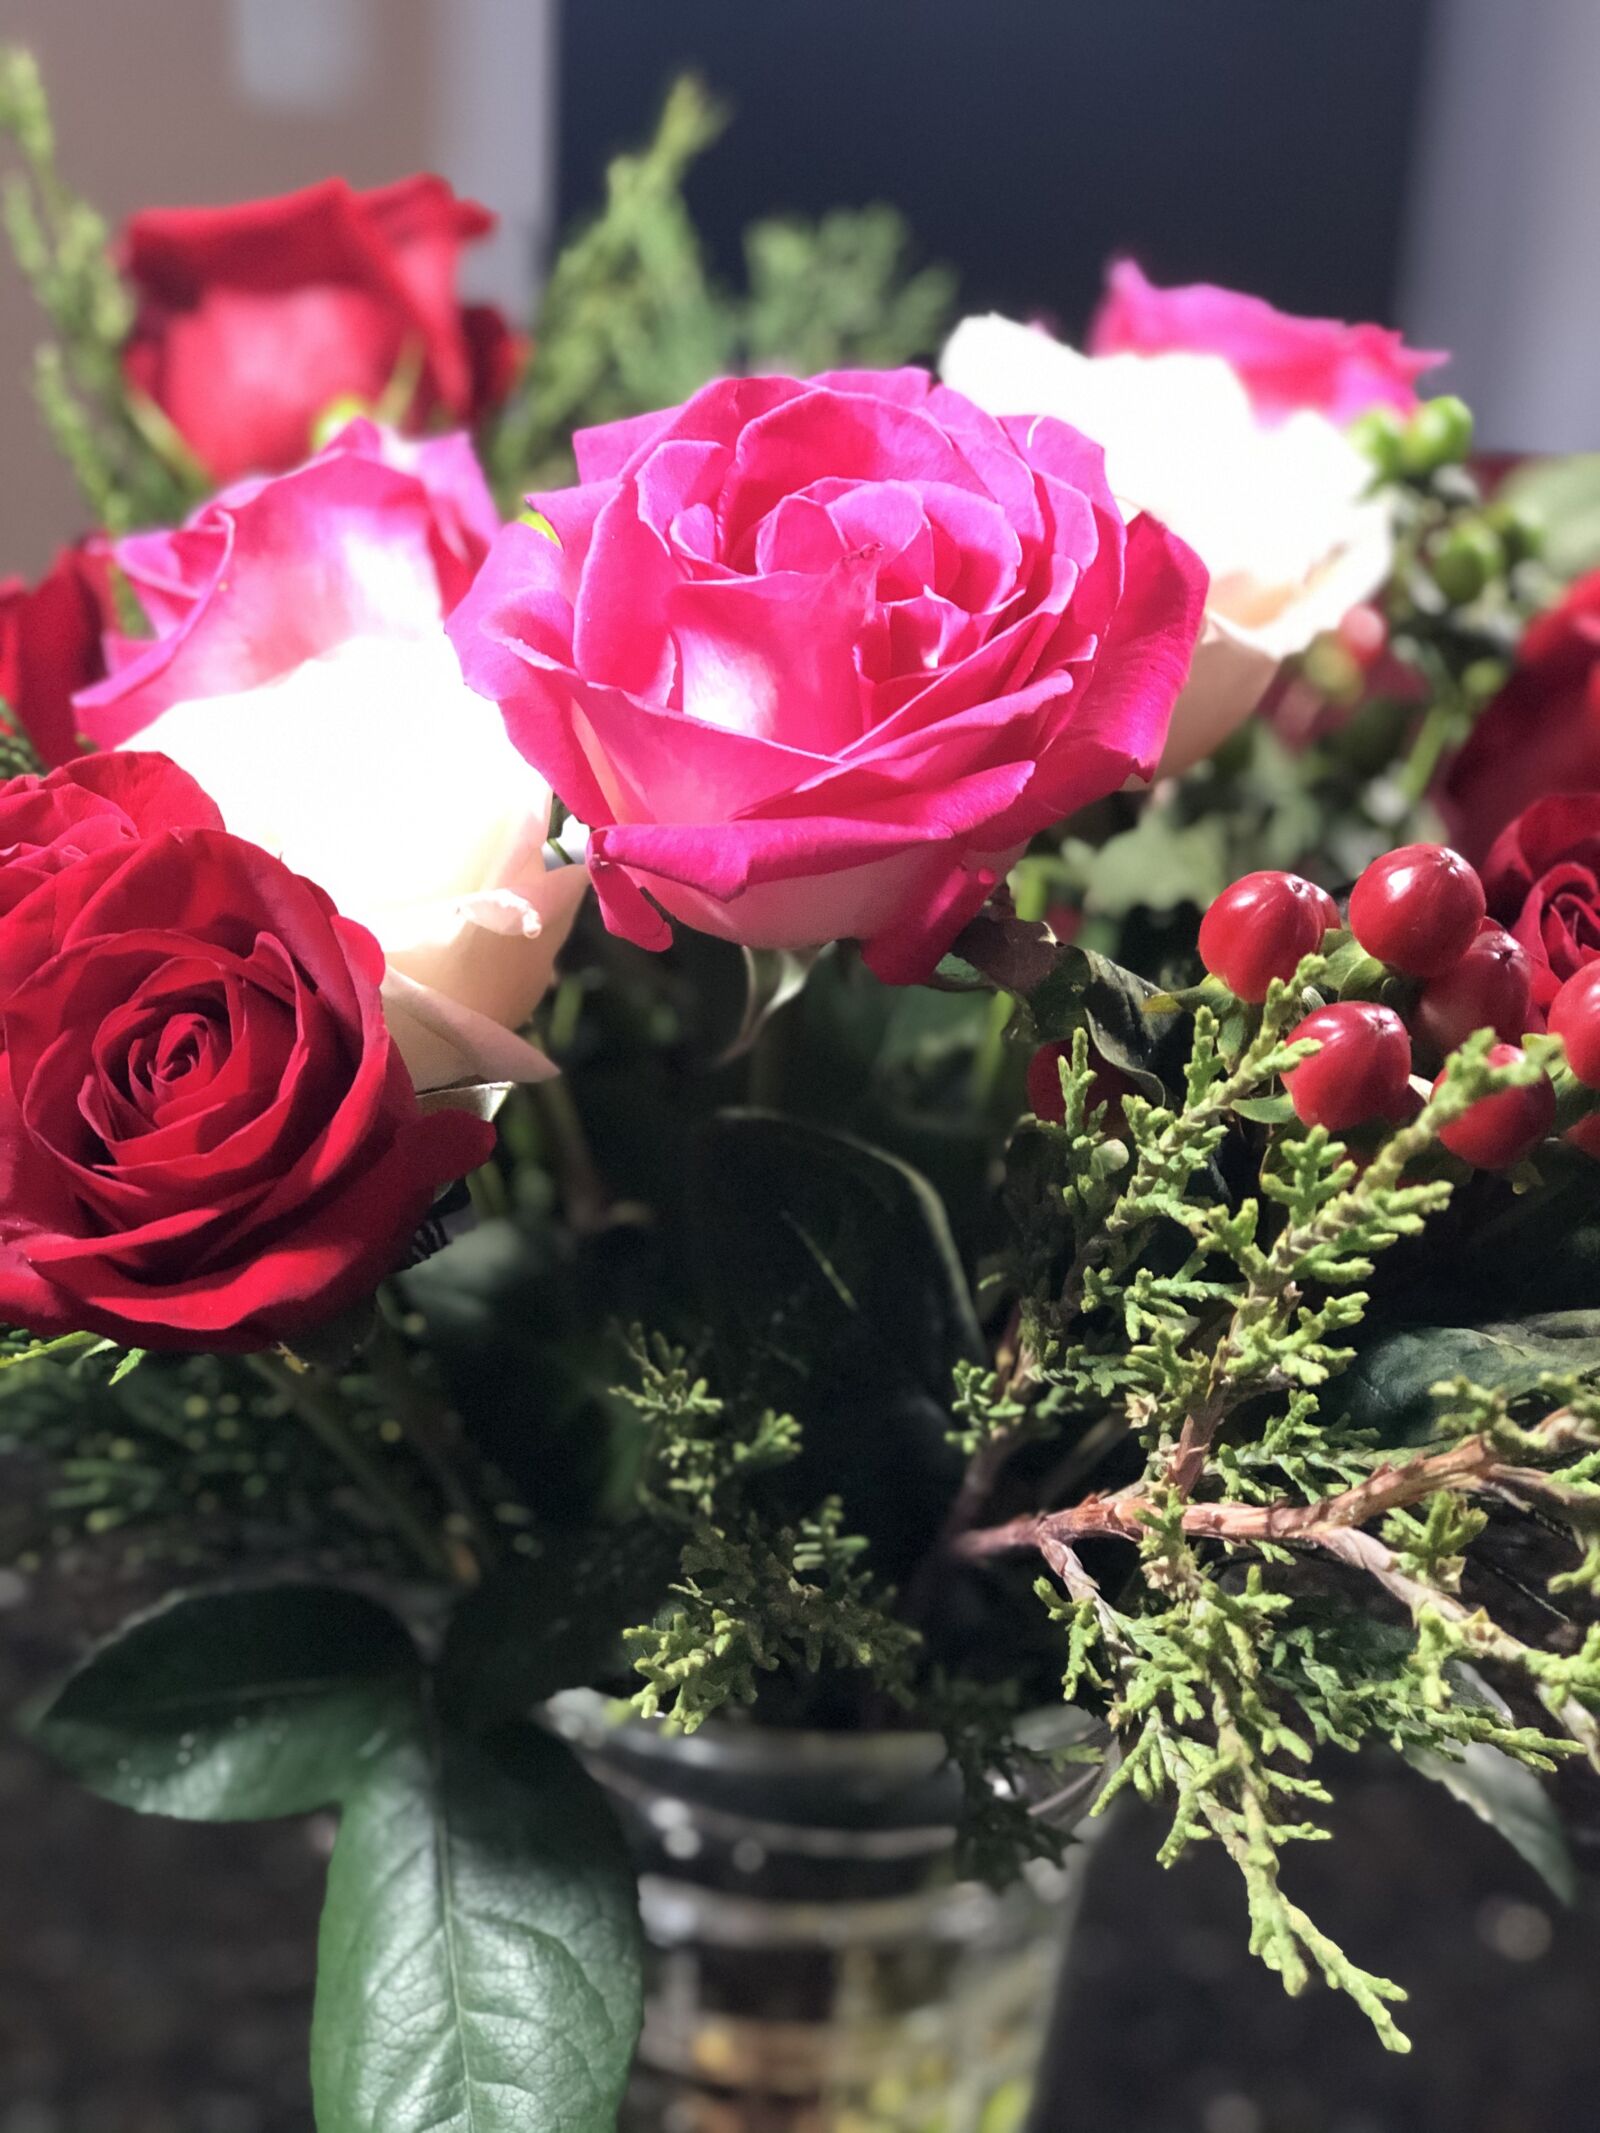 iPhone 8 Plus back dual camera 6.6mm f/2.8 sample photo. Roses, greens, wedding photography